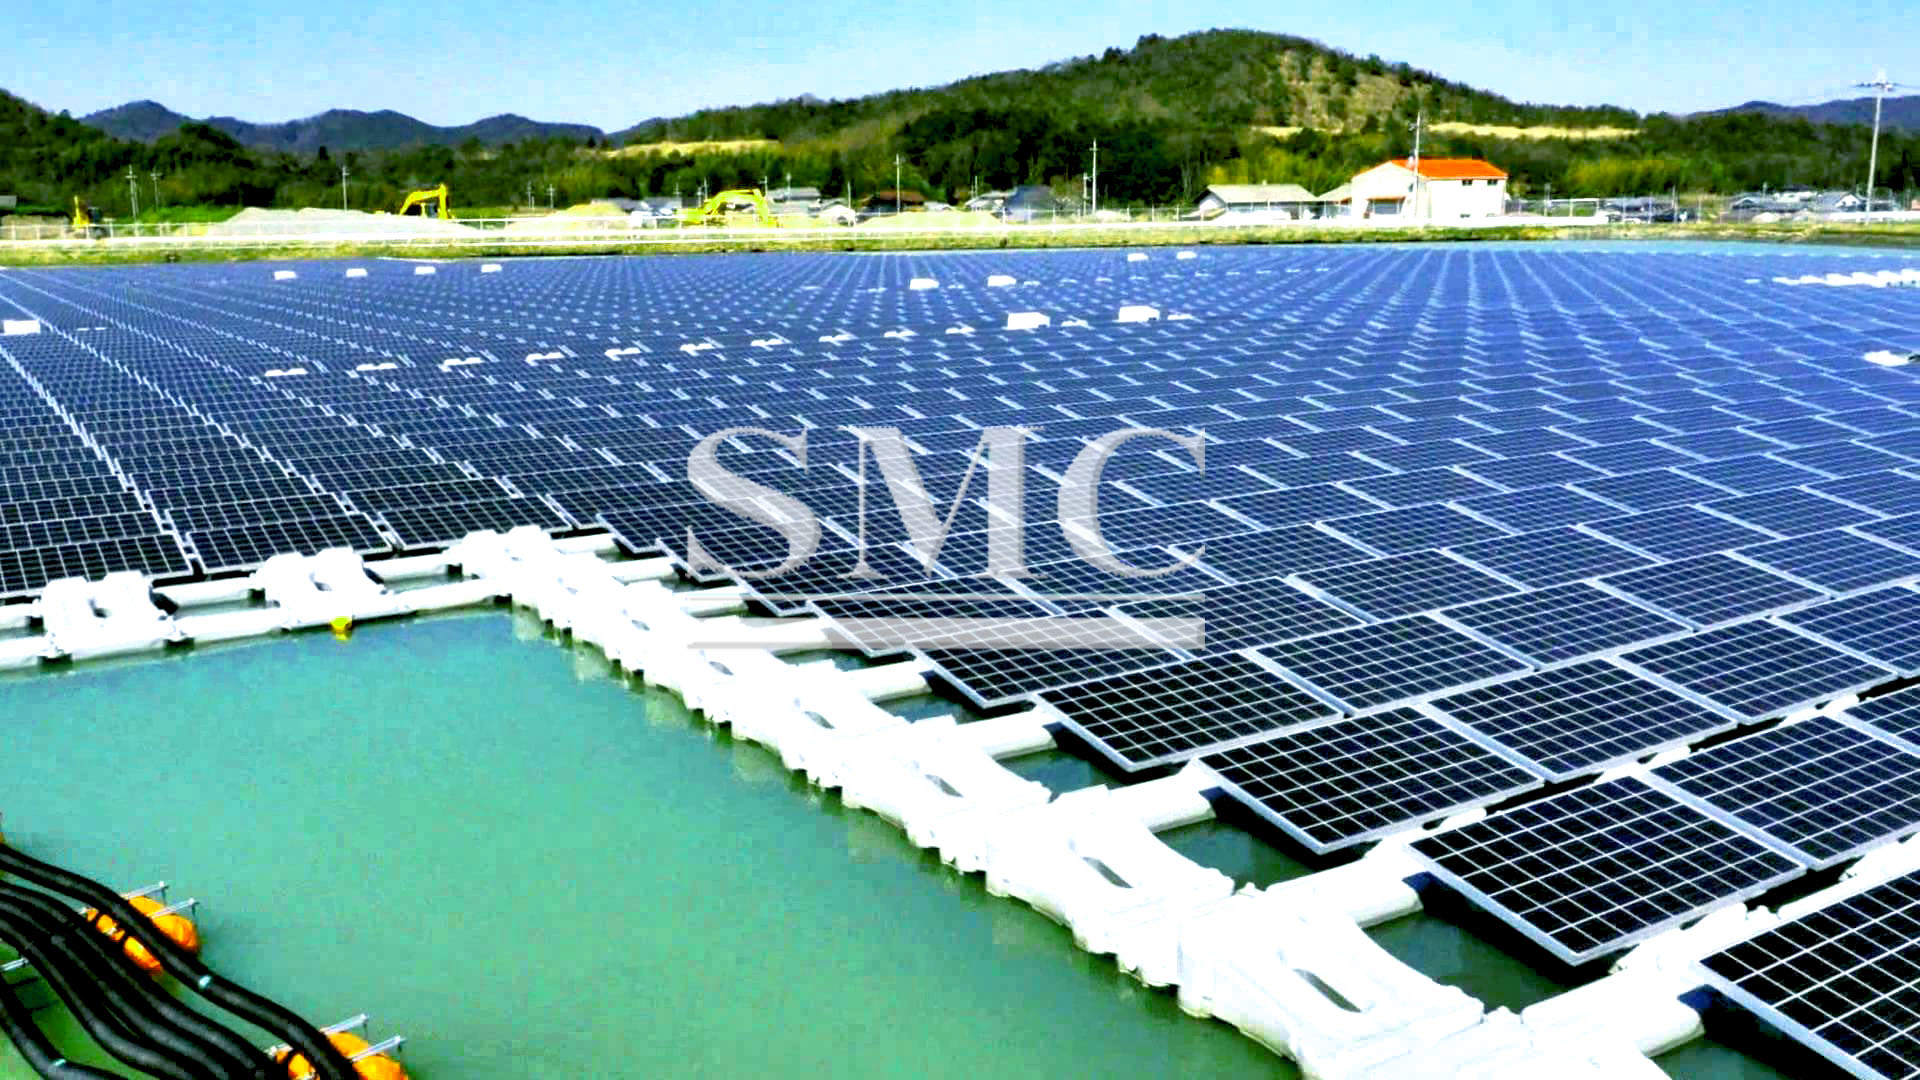 Home to the World’s Largest Floating Solar Farm